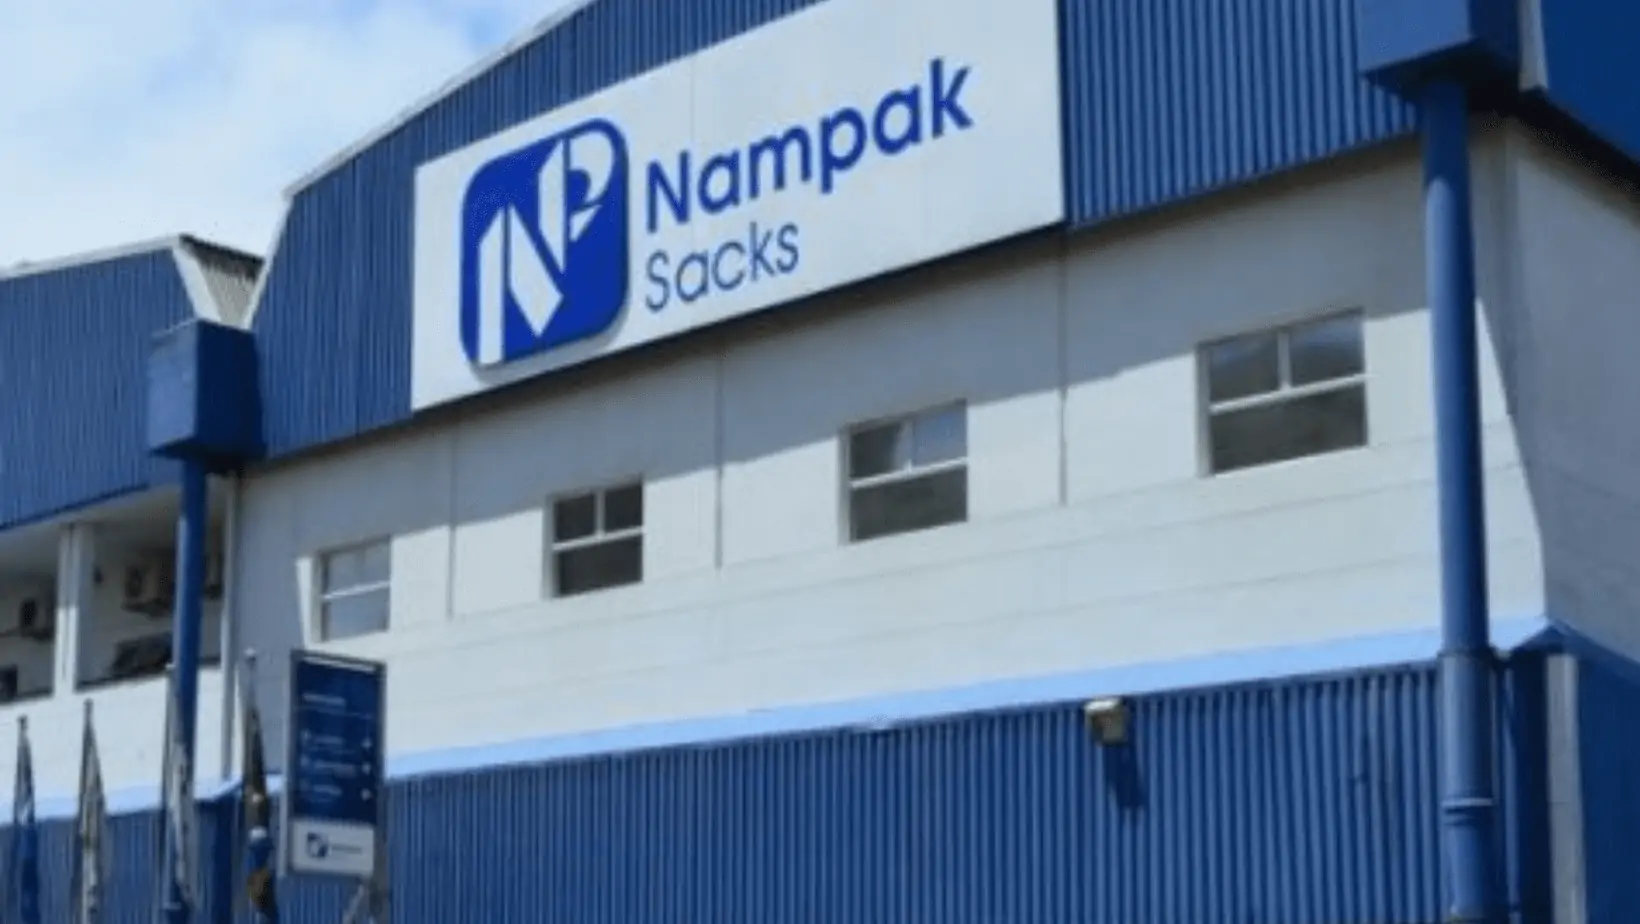 Leadership Changes at Nampak Limited: New Chairman Appointed